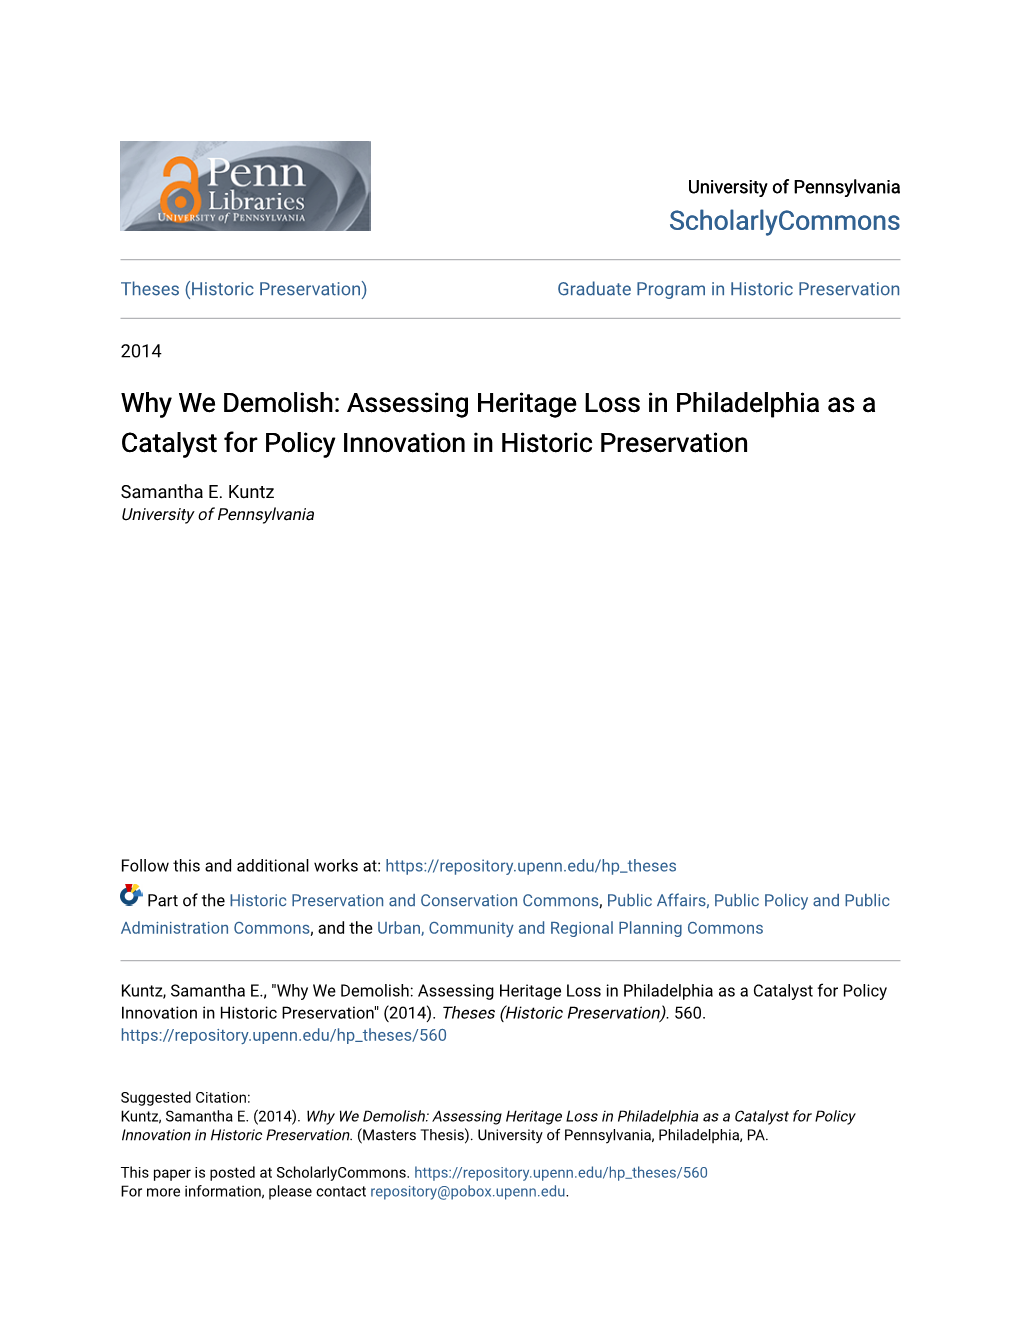 Why We Demolish: Assessing Heritage Loss in Philadelphia As a Catalyst for Policy Innovation in Historic Preservation